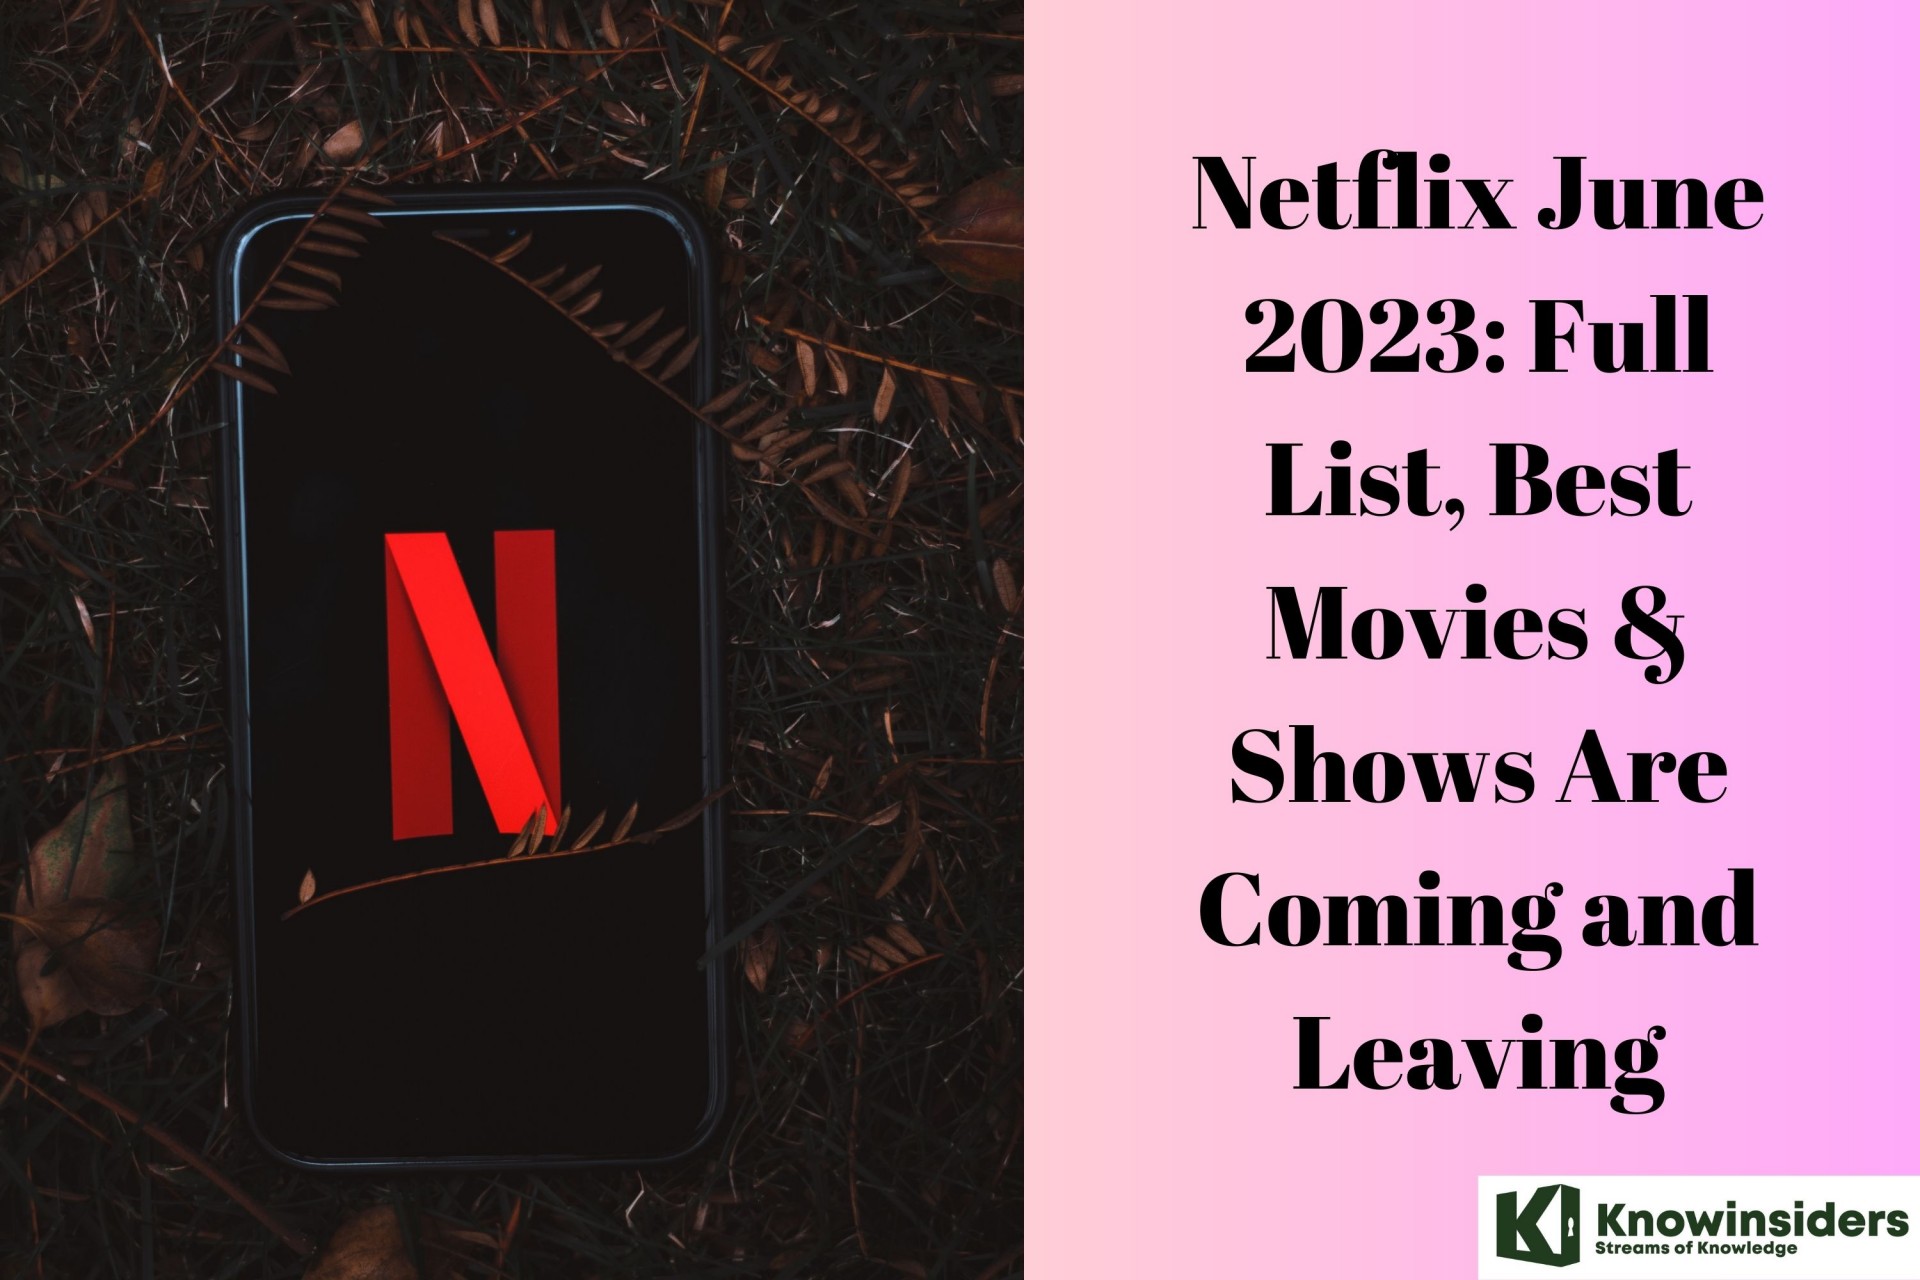 Netflix June 2023: Full List, Best Movies & Shows Are Coming and Leaving